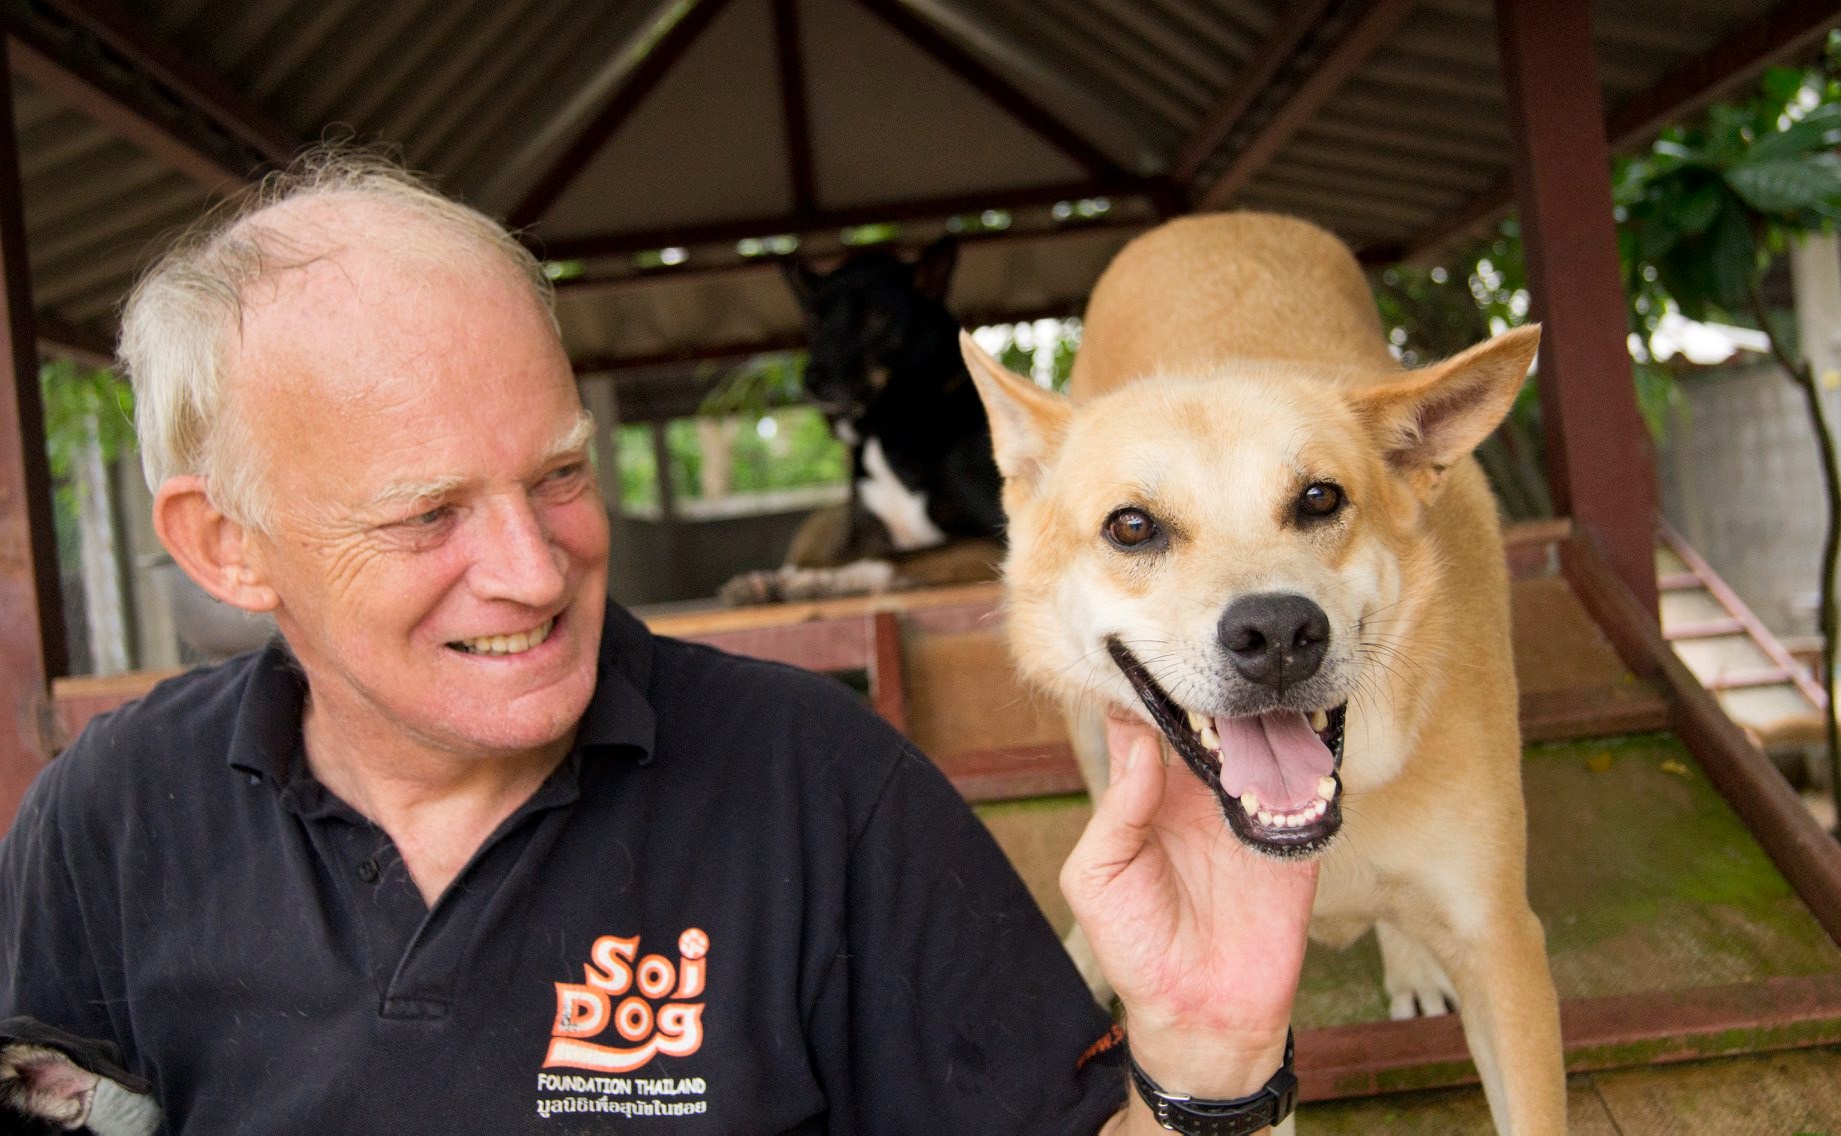 Soi Dog Foundation co-founder John Dalley and a rescued dog. Photo: Soi Dog Foundation / Courtesy